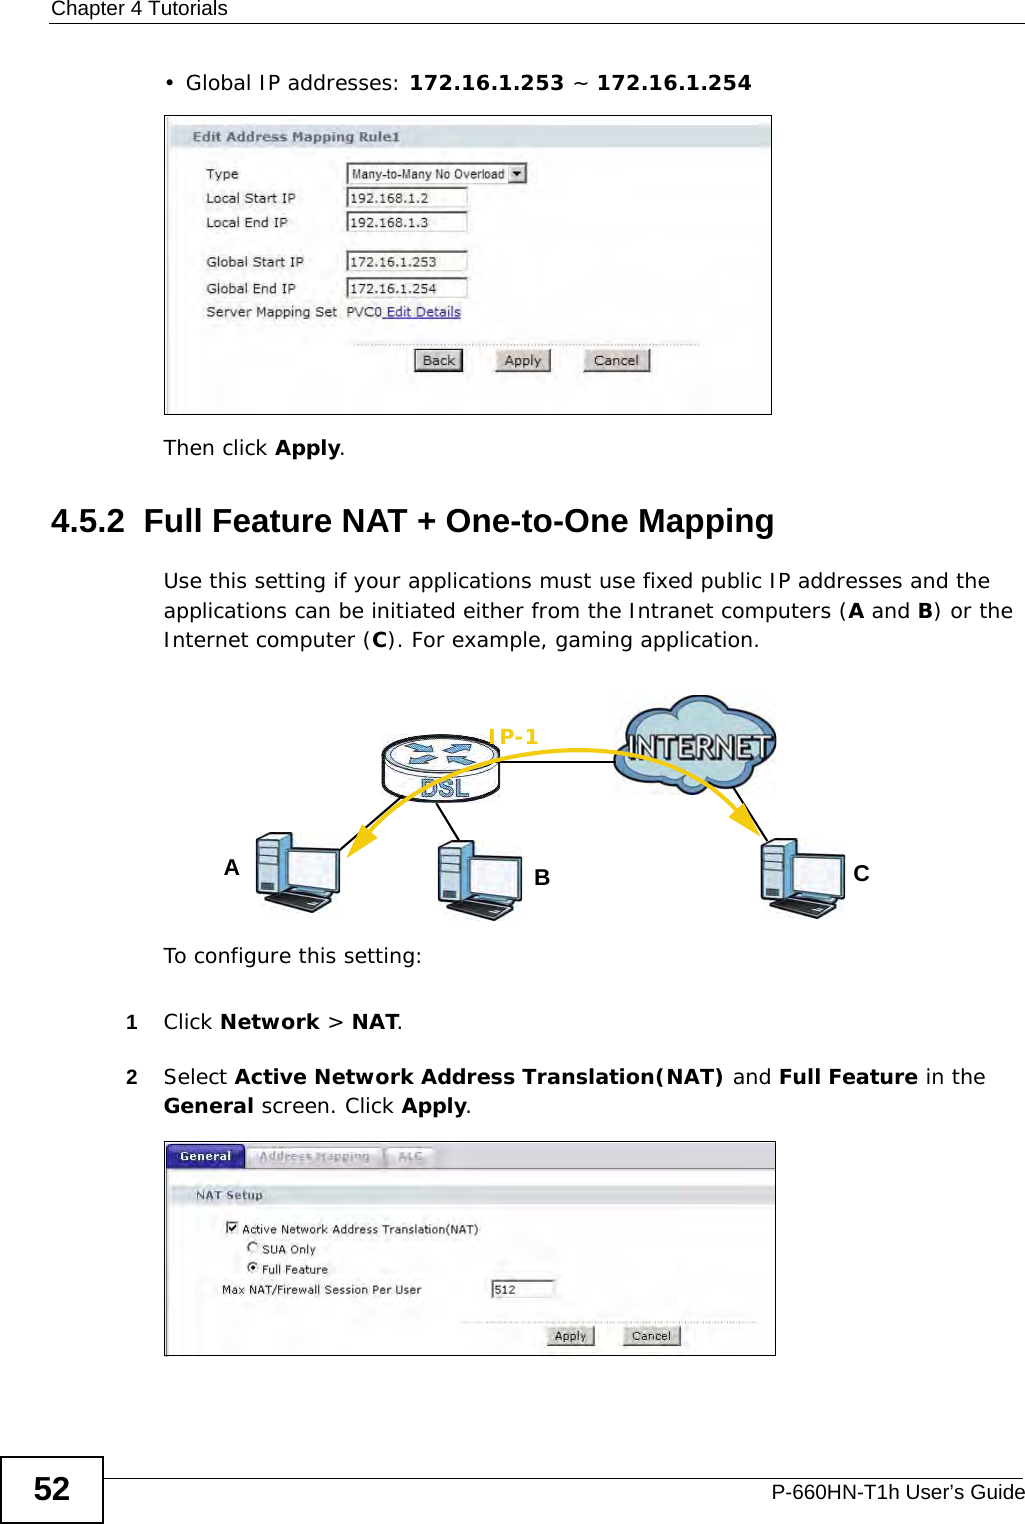 Chapter 4 TutorialsP-660HN-T1h User’s Guide52• Global IP addresses: 172.16.1.253 ~ 172.16.1.254Then click Apply.4.5.2  Full Feature NAT + One-to-One MappingUse this setting if your applications must use fixed public IP addresses and the applications can be initiated either from the Intranet computers (A and B) or the Internet computer (C). For example, gaming application.To configure this setting:1Click Network &gt; NAT.2Select Active Network Address Translation(NAT) and Full Feature in the General screen. Click Apply.ABIP-1C